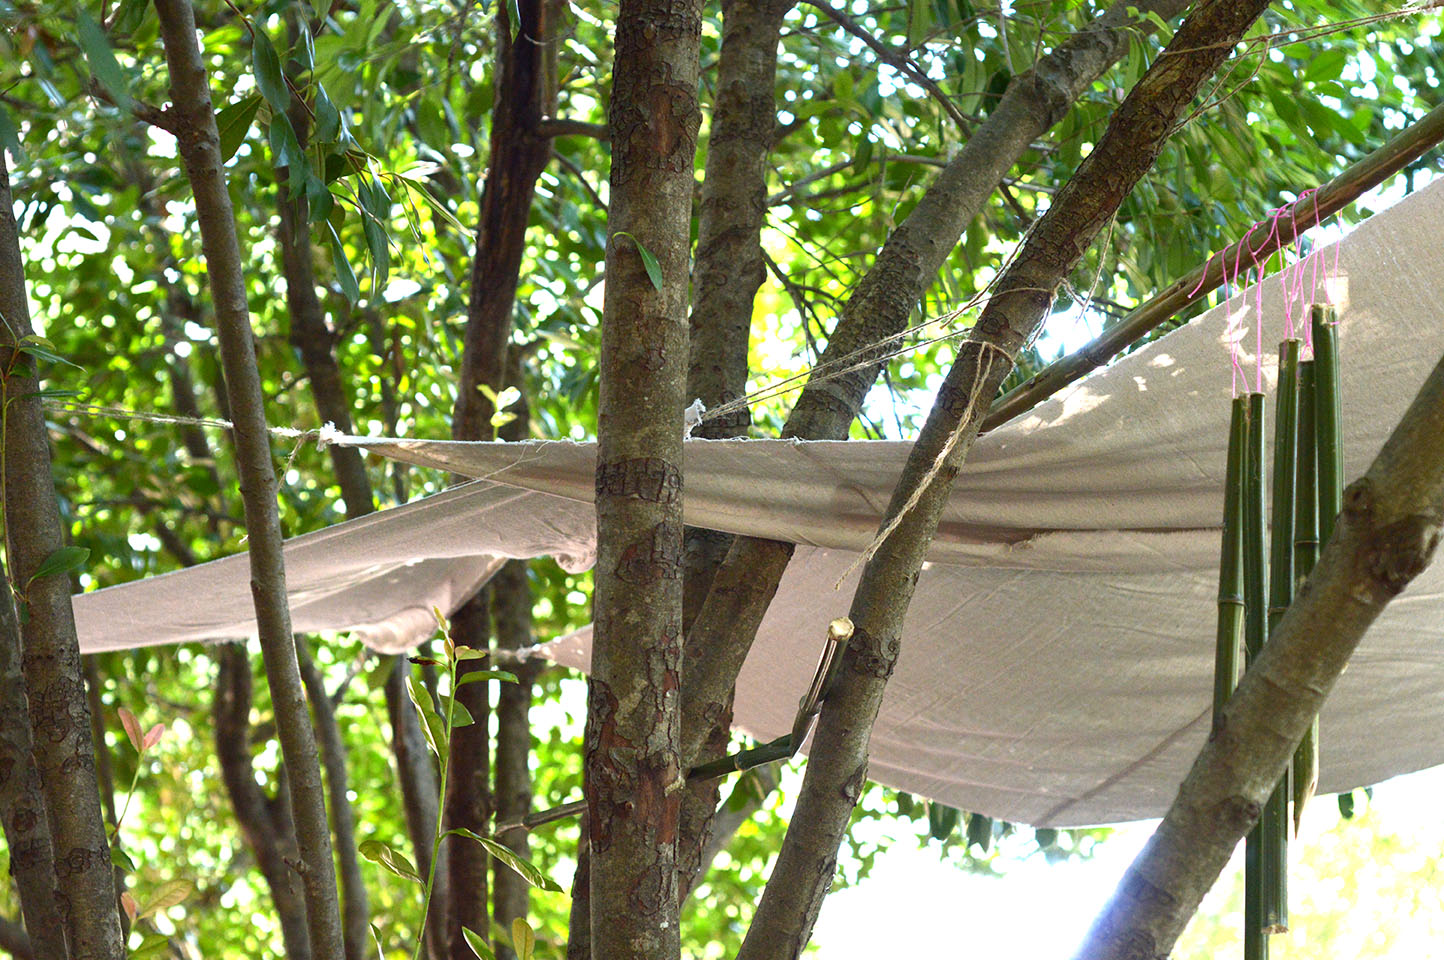 cloth shelter attached to trees